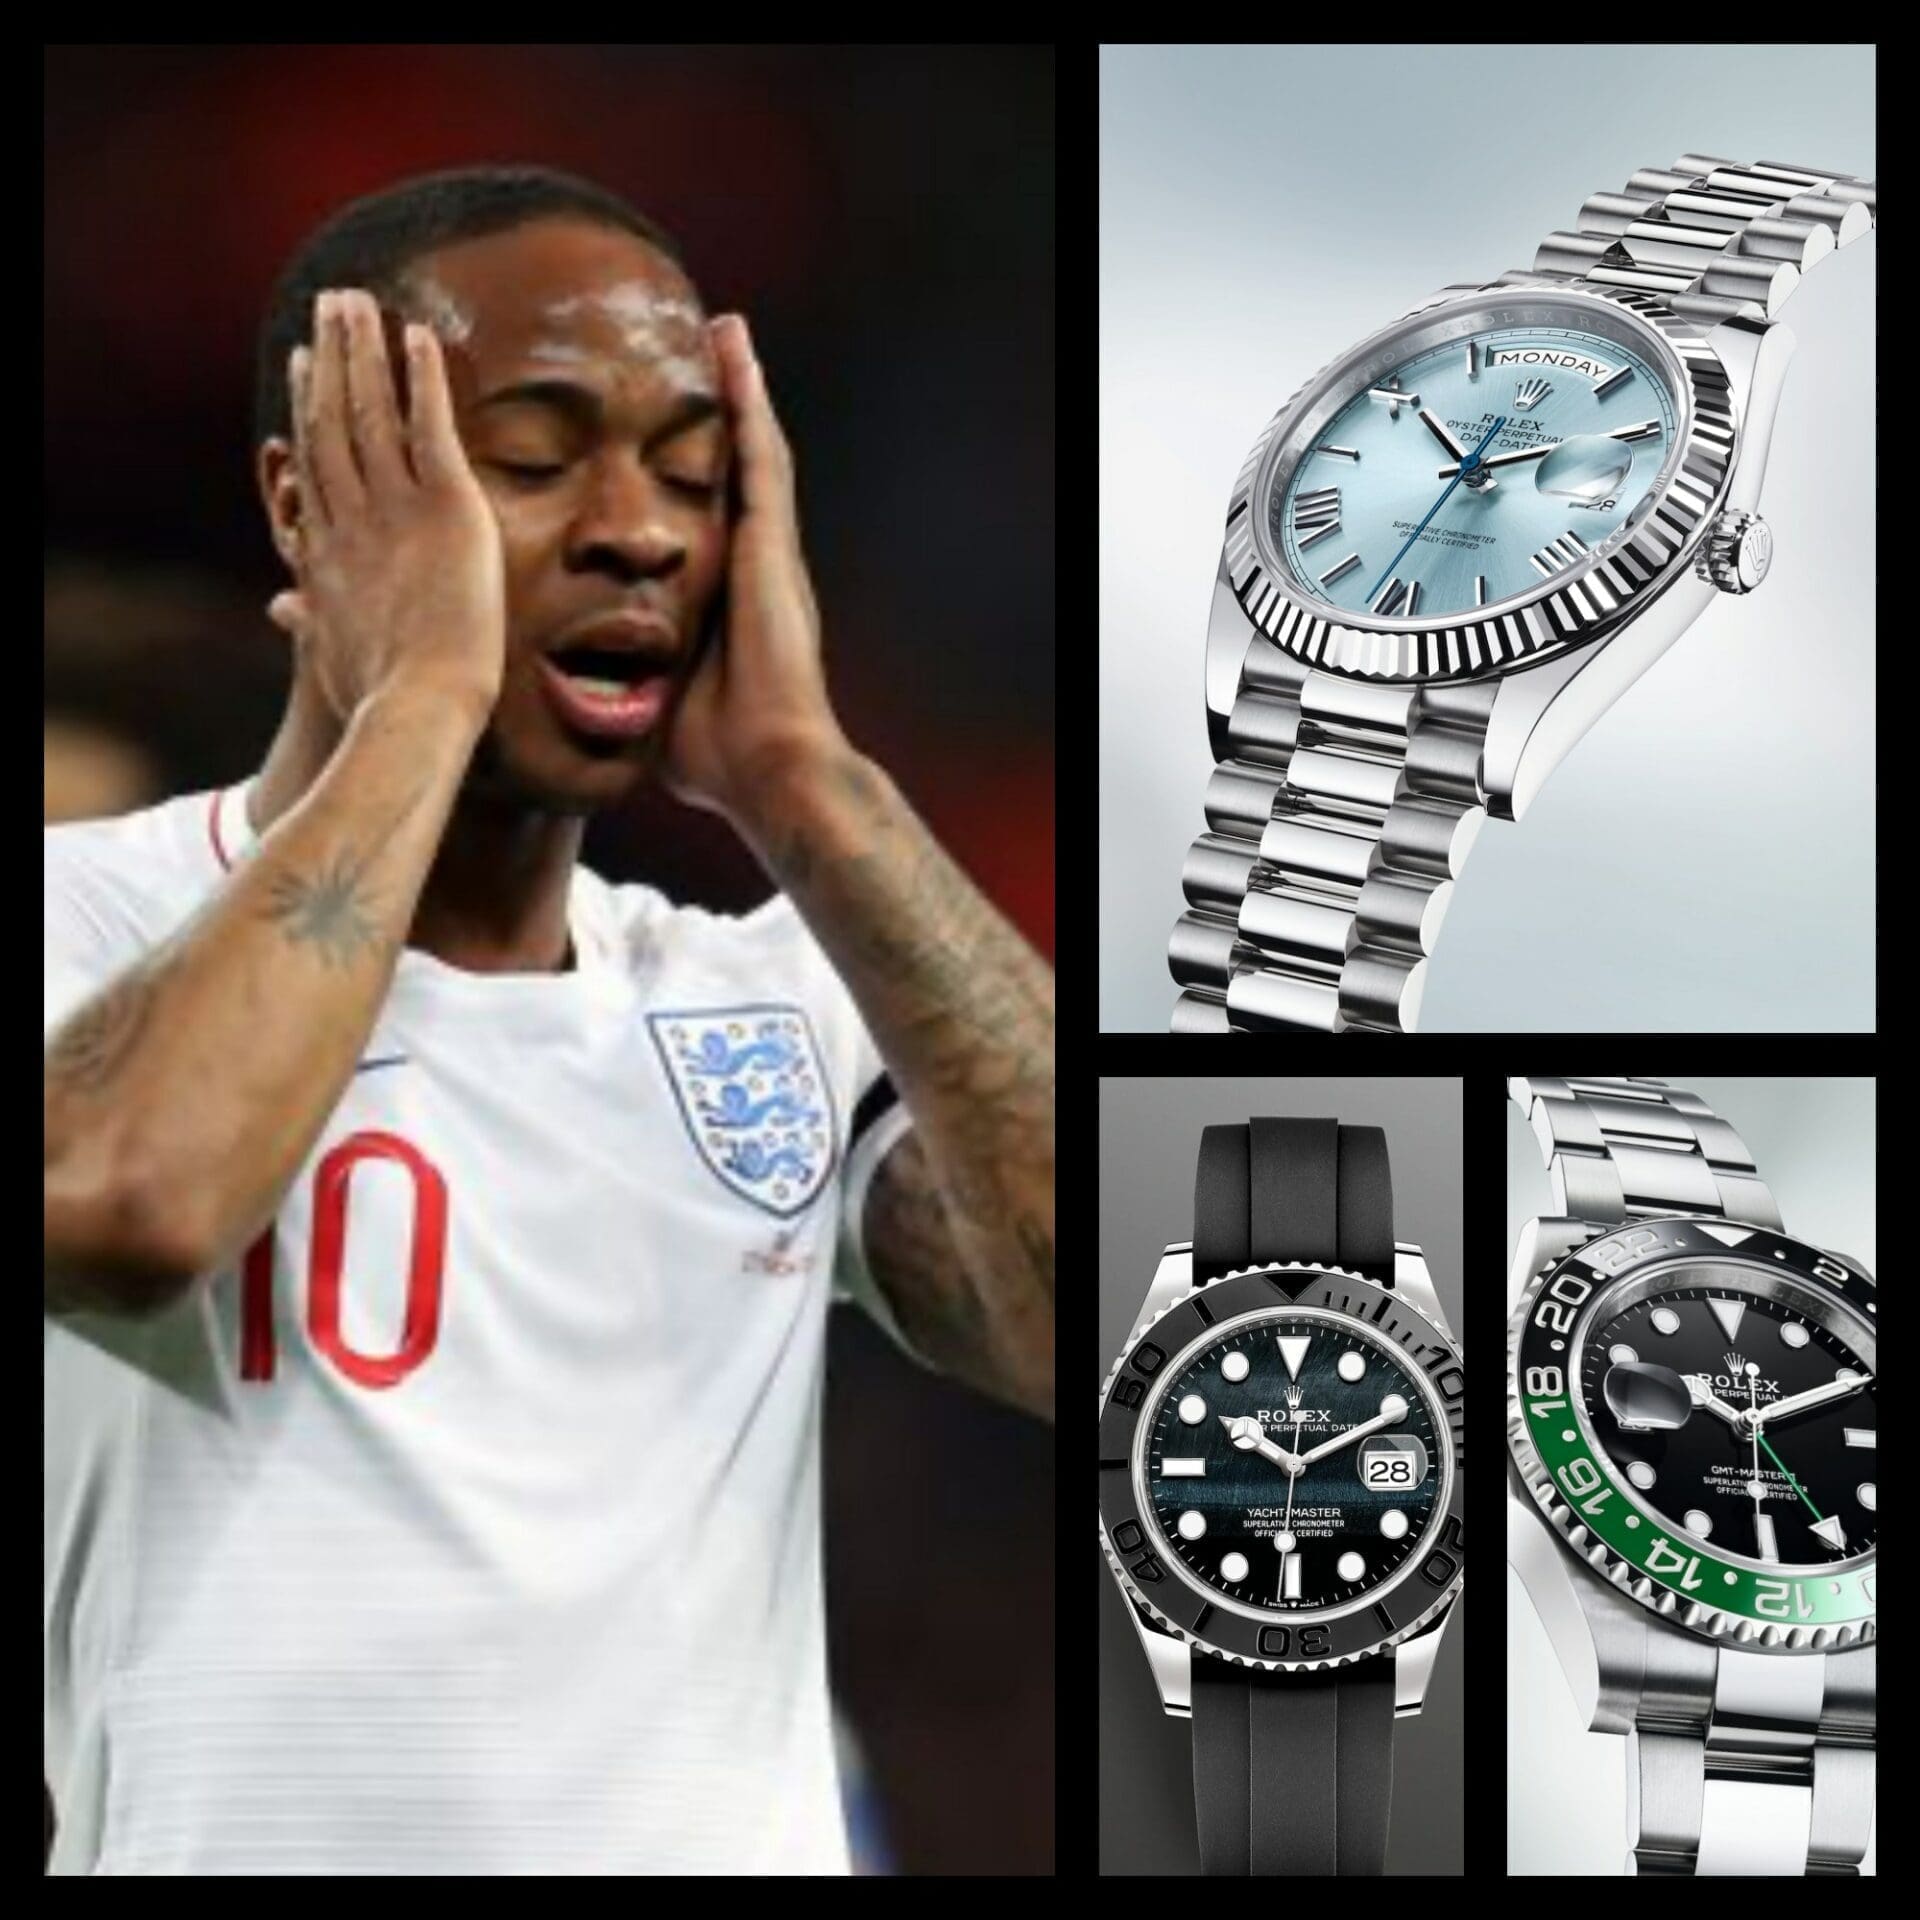 Raheem Sterling lost £300,000 of watches in a robbery. How should he replace them?